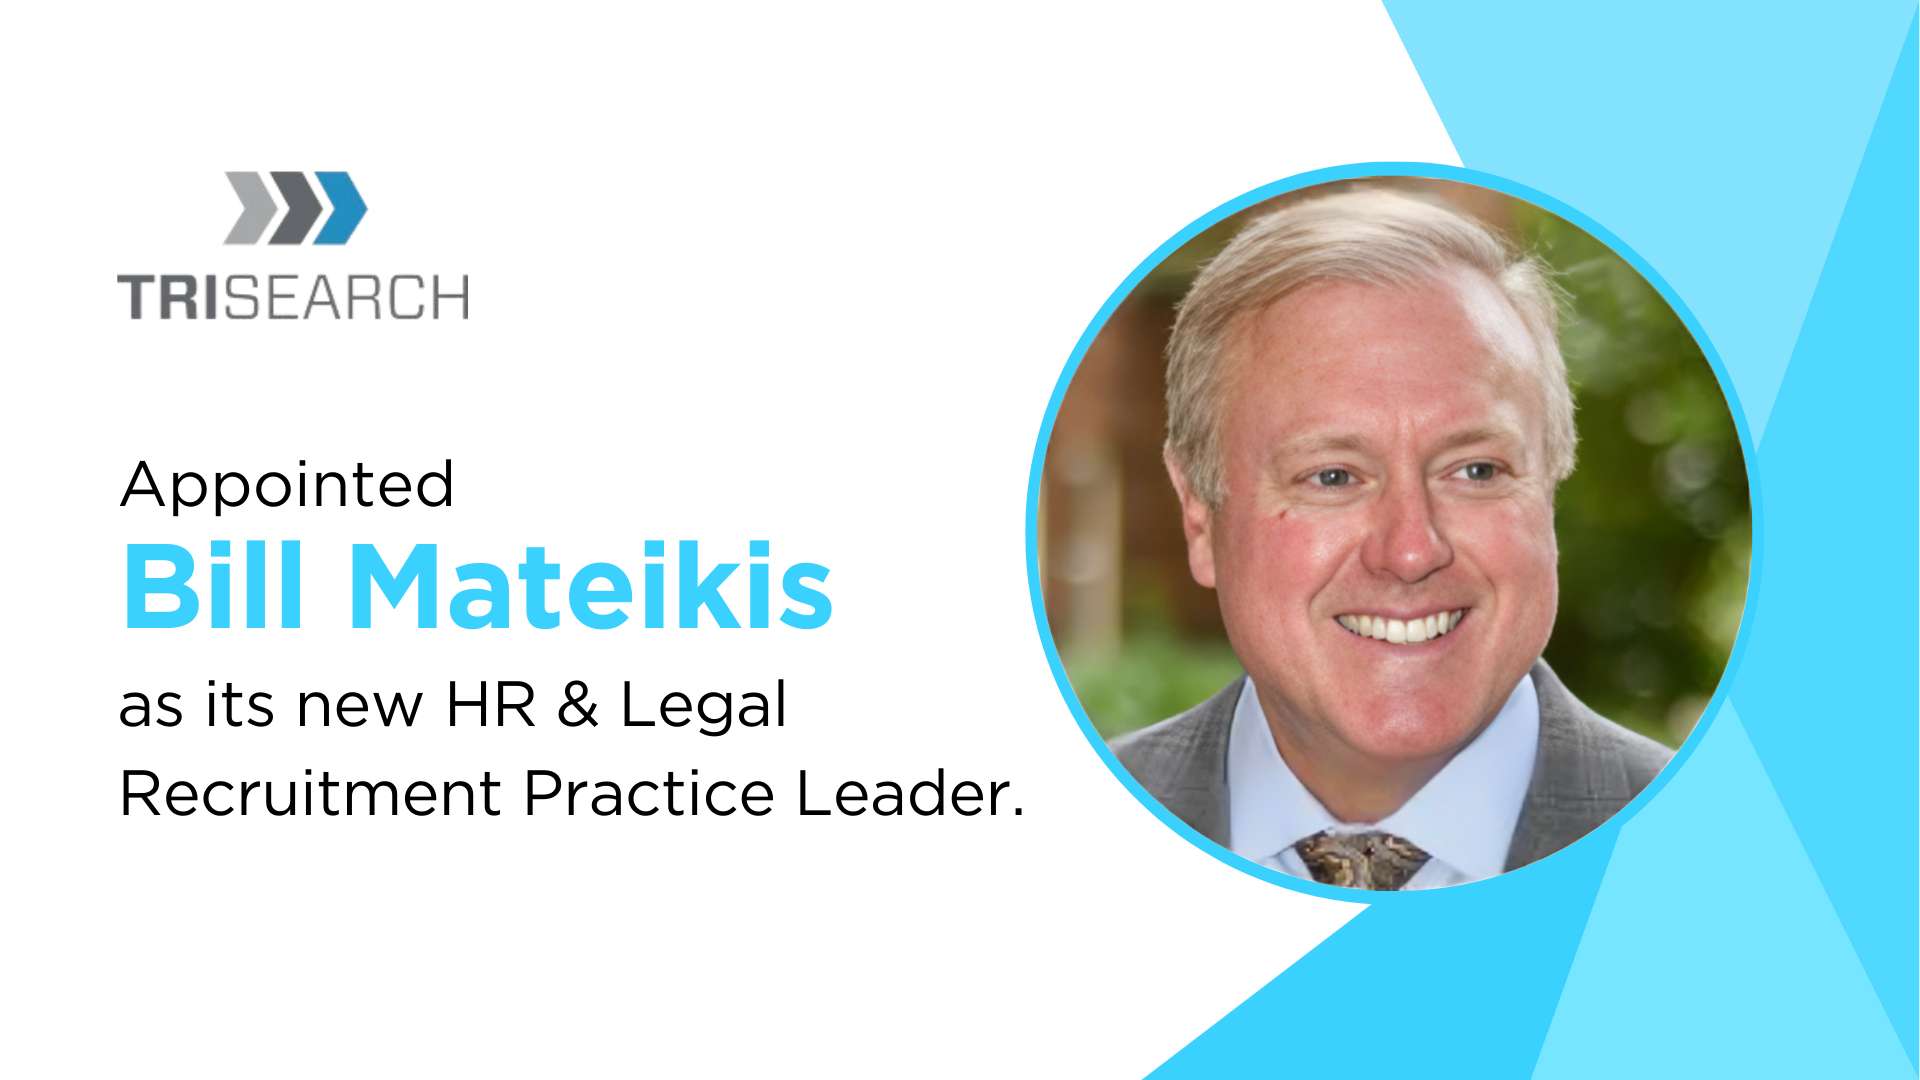 TriSearch Welcomes Industry Veteran Bill Mateikis to Lead HR & Legal Recruitment Practice